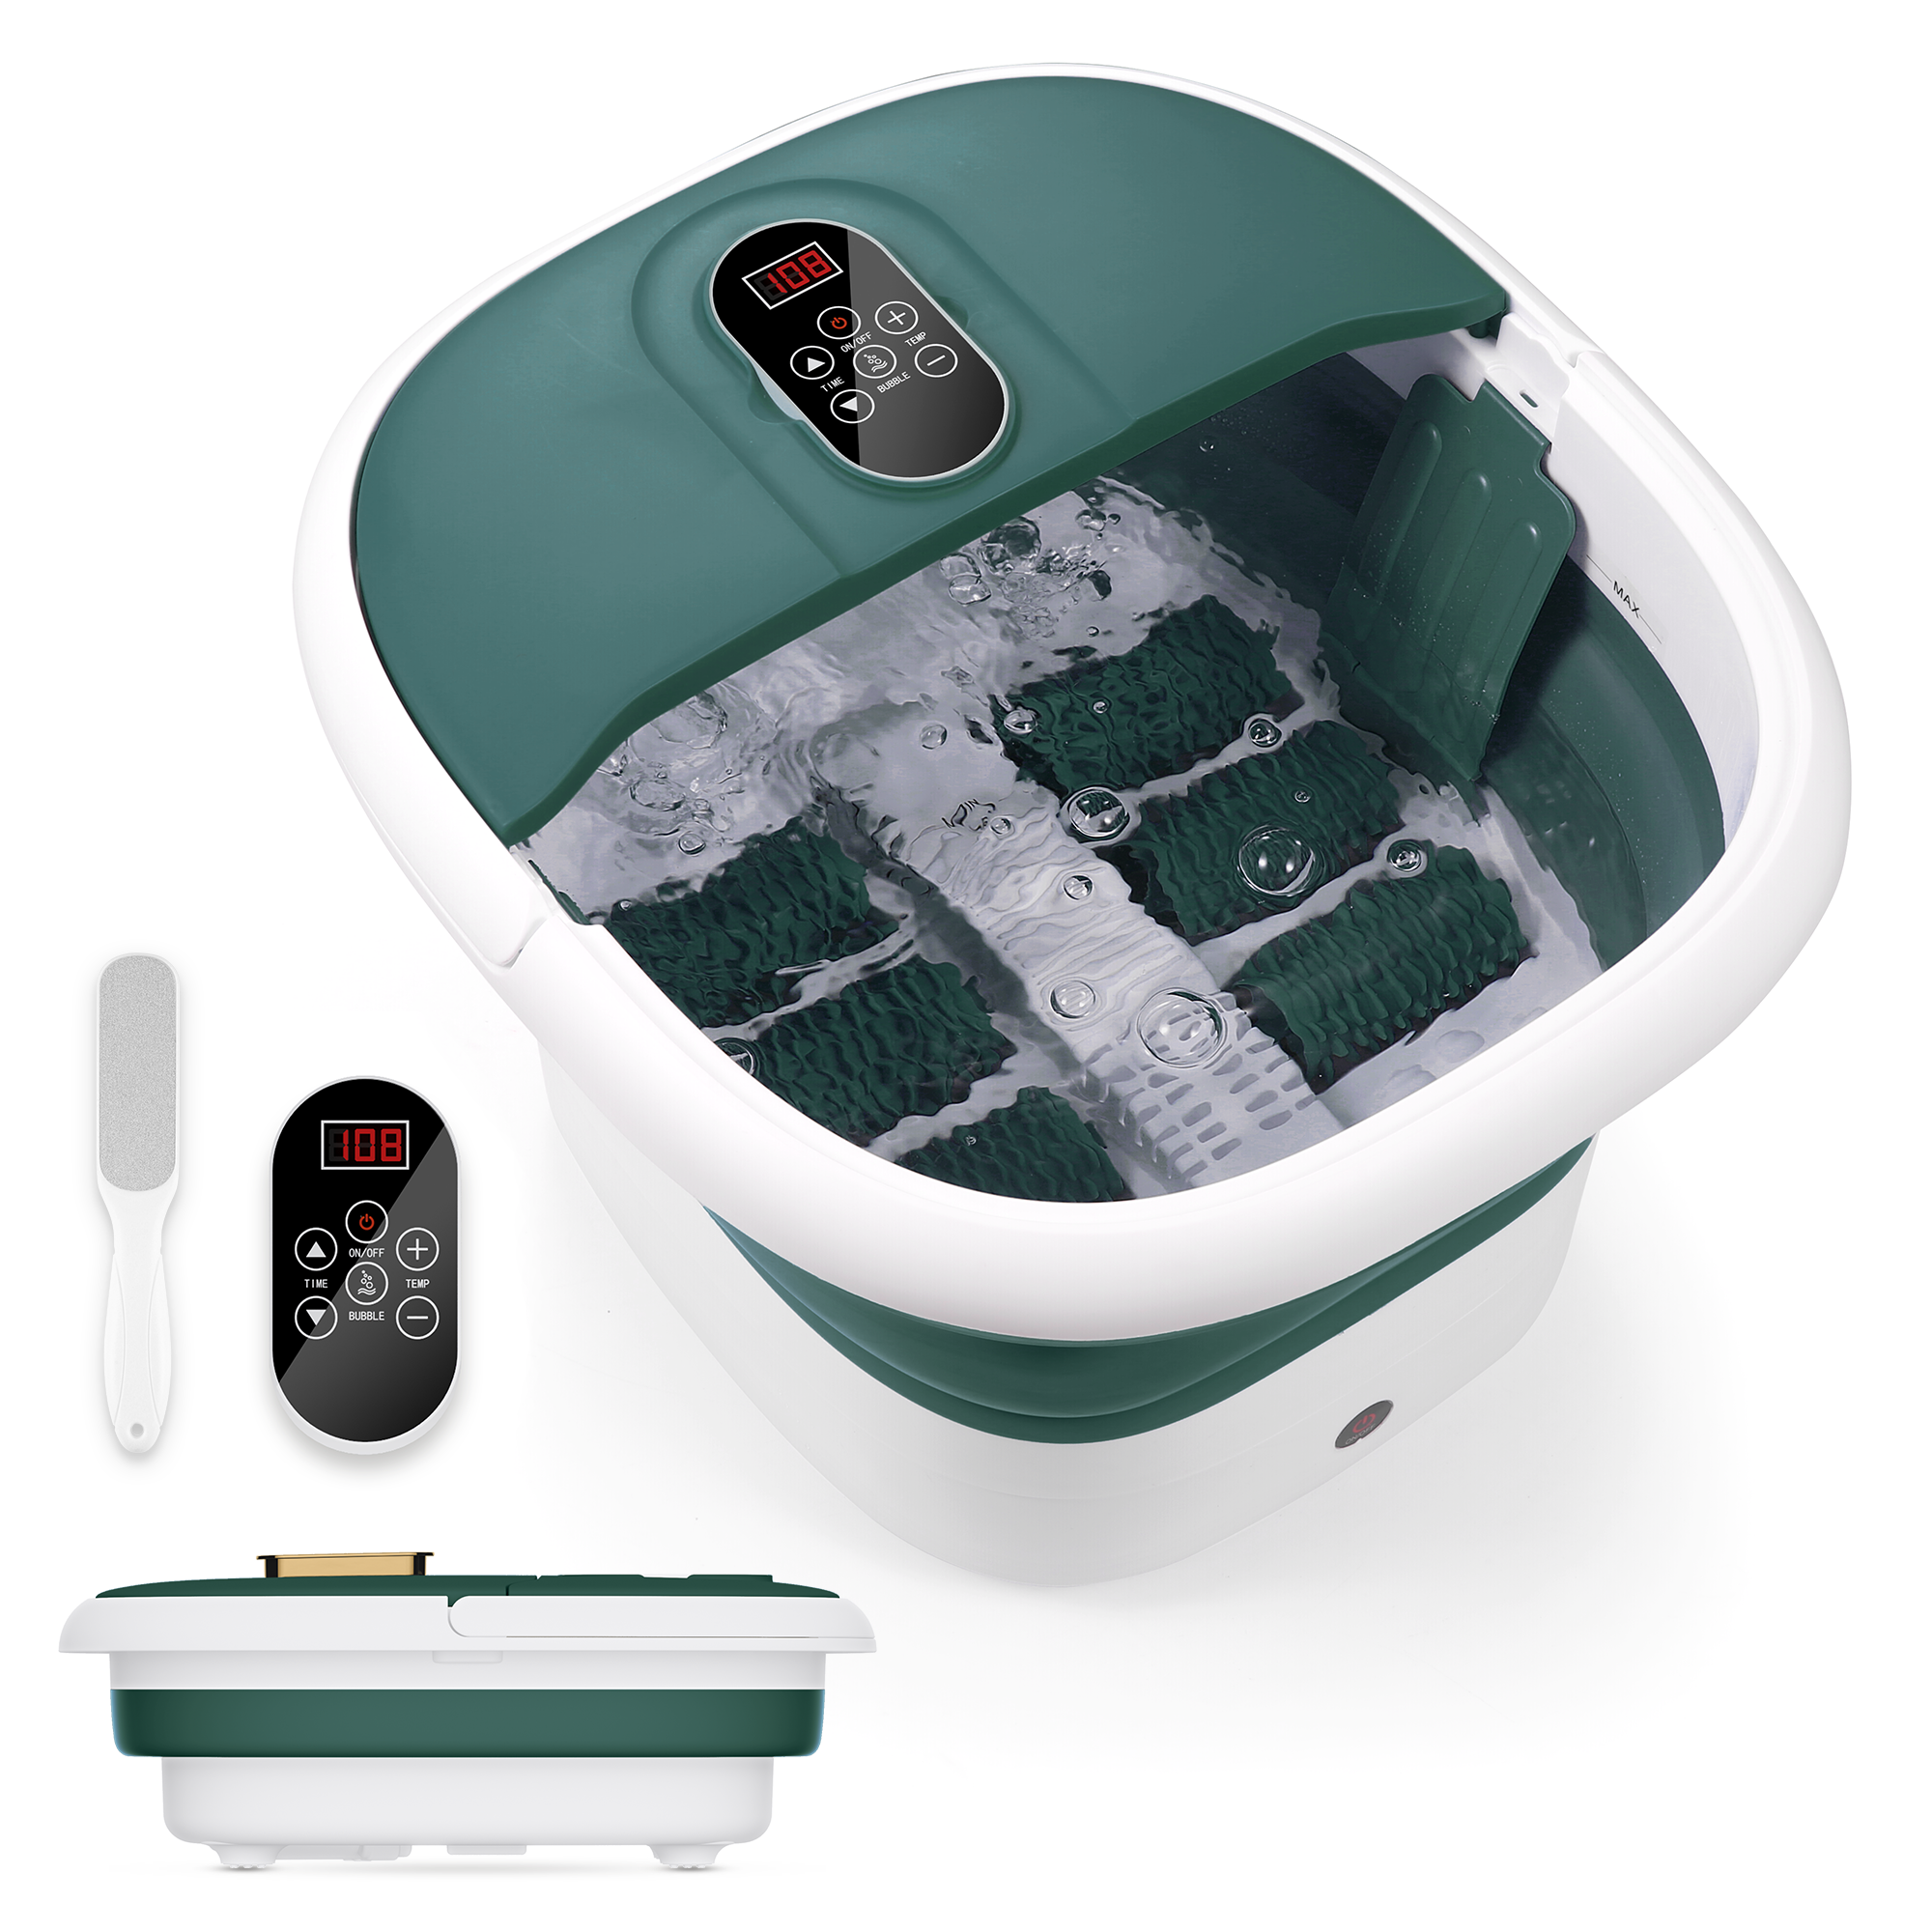 Load image into Gallery viewer, MaxKare Collapsible Foot Spa Bath Massager with Heat, Bubbles, Vibration, Digital Display Remote Control for Temperature &amp; Time Control, Soothe and Comfort Feet-Green
